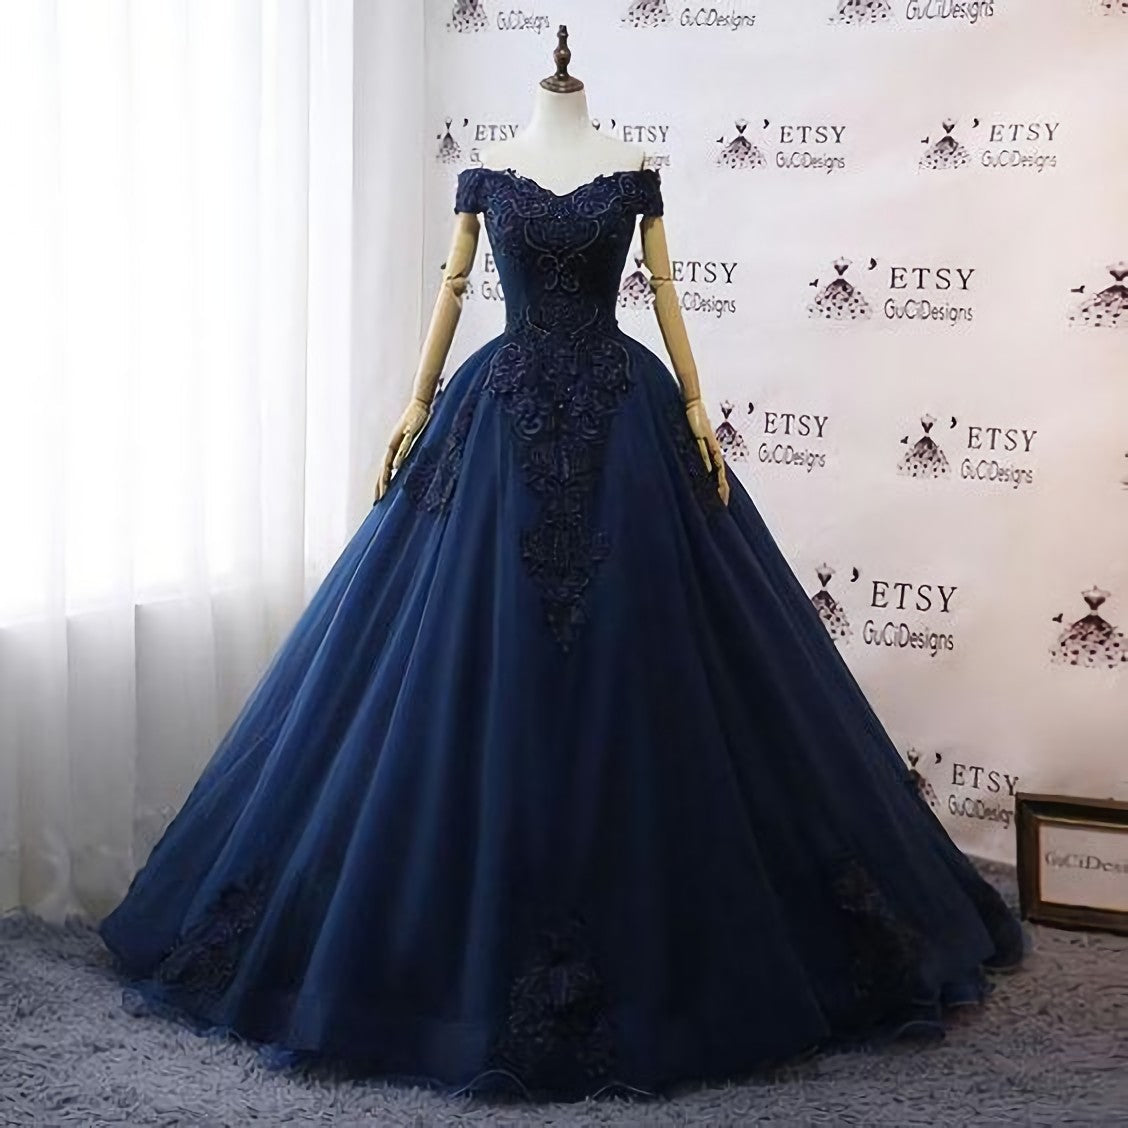 Wedding Dress For The Beach, Prom Dresses, Navy Blue Wedding Dresses, Floral Lace Ball Gown Off Shoulder Evening Dress